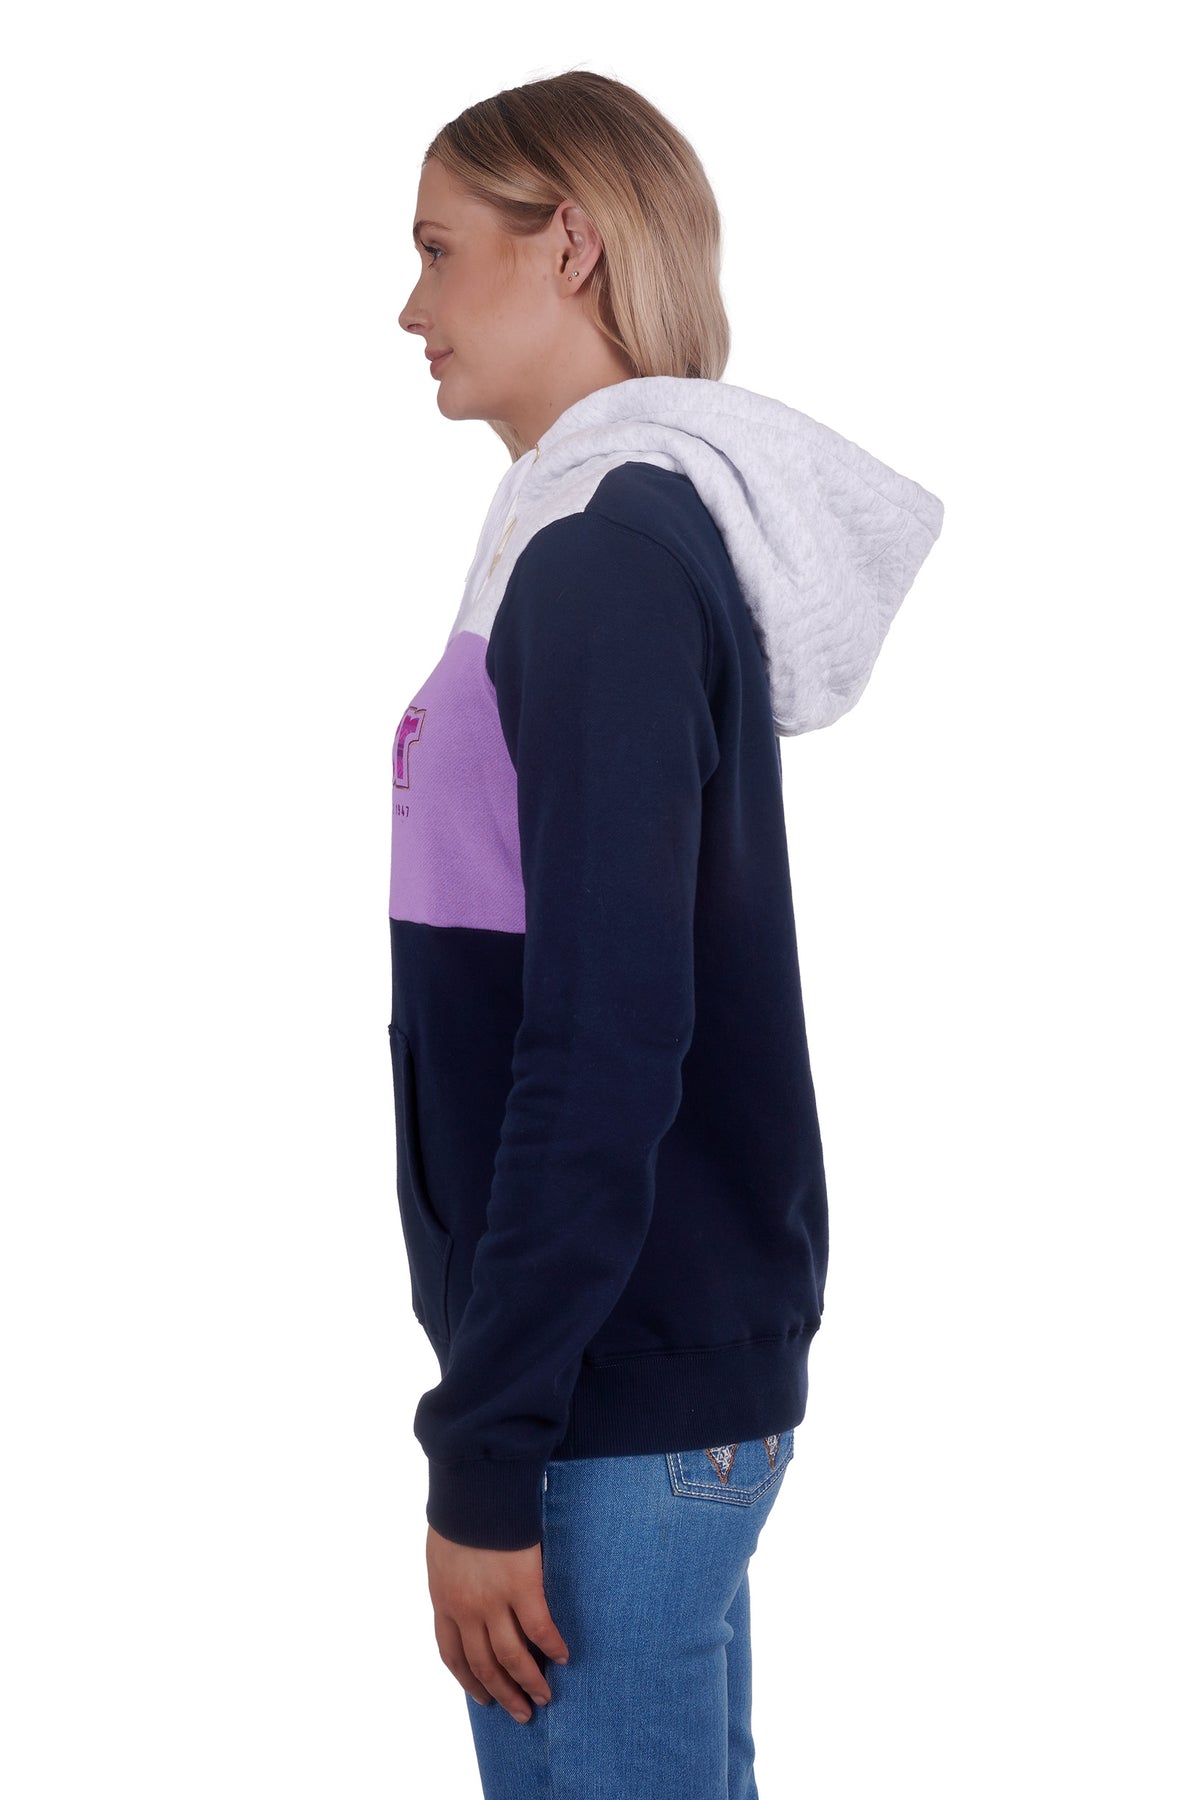 Wrangler Womens Salley Pullover Hoodie - Navy/White Marle